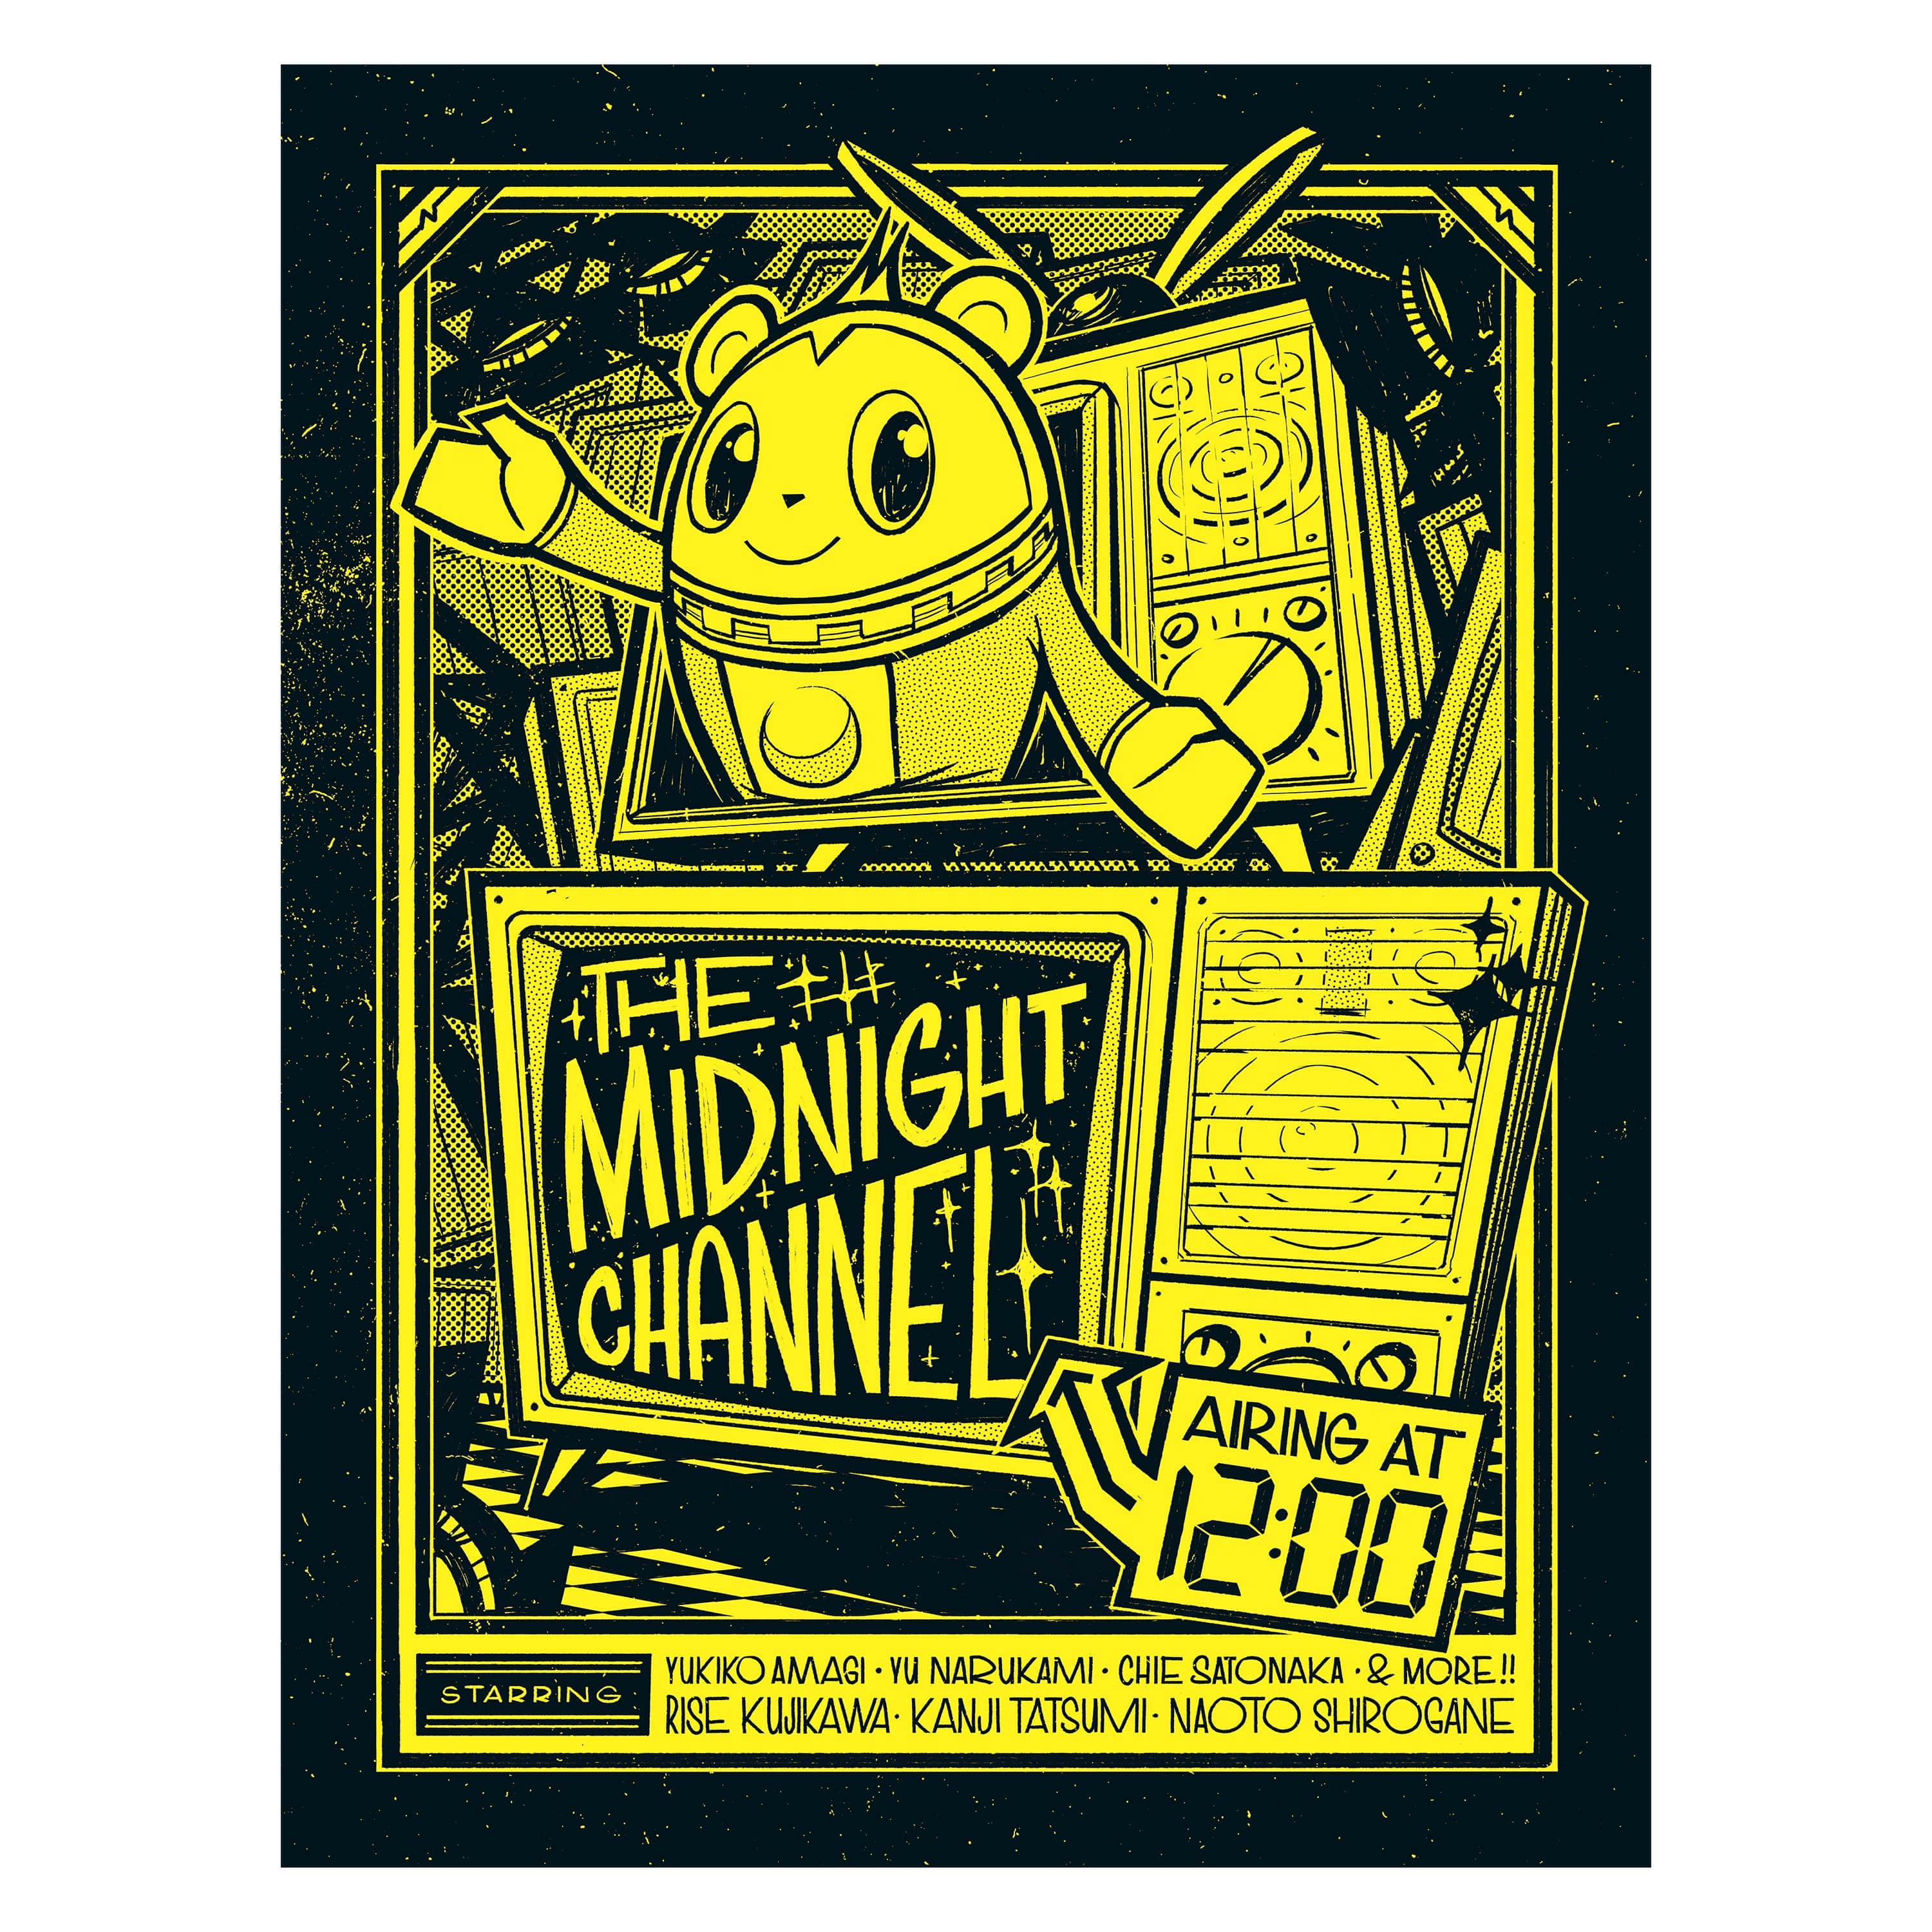 Persona 4 - Midnight Channel Street Poster